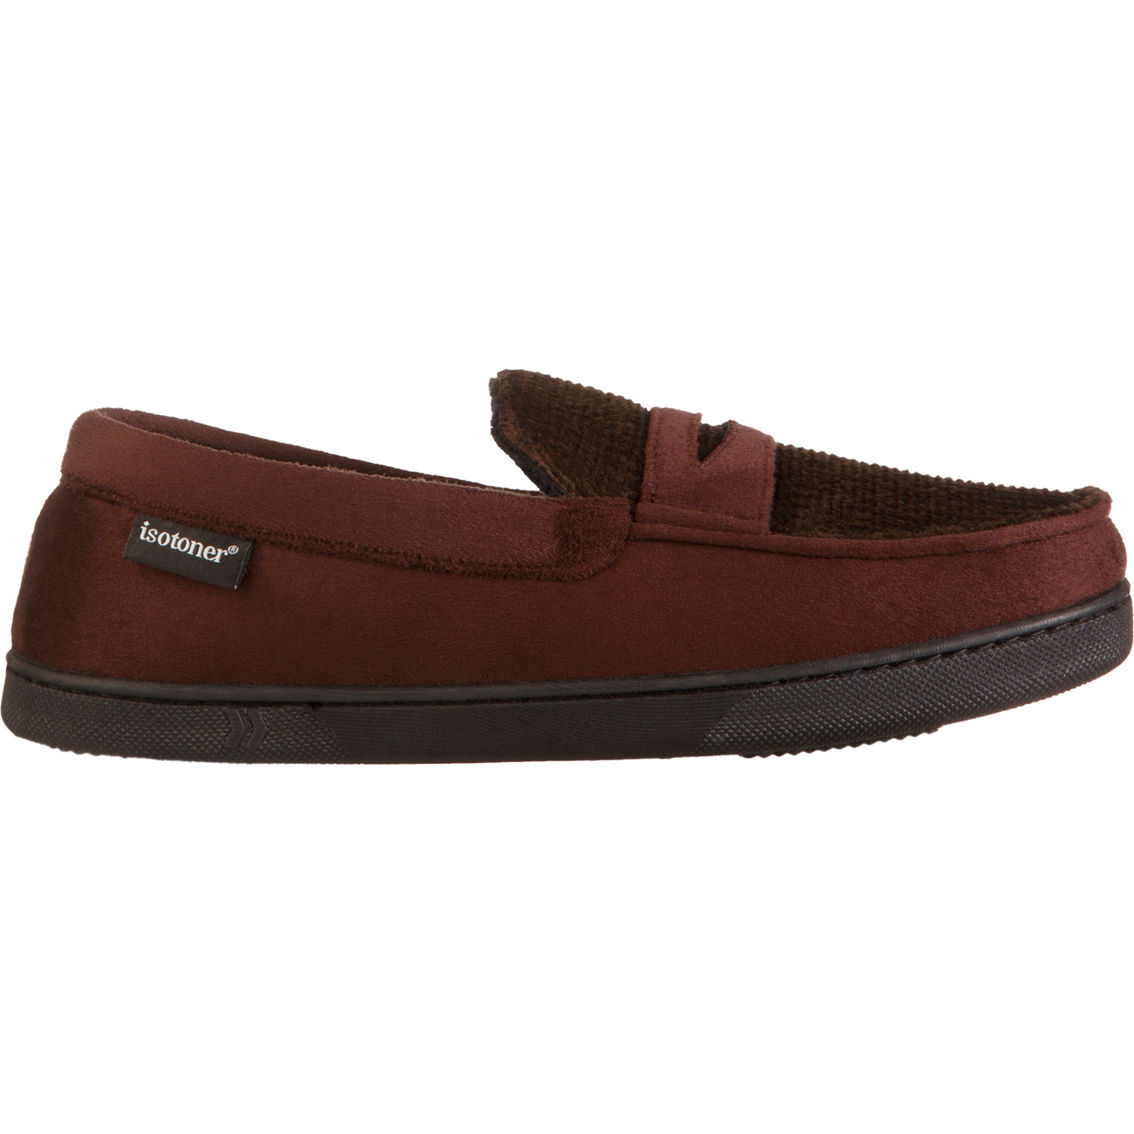 Isotoner Memory Foam Microsuede Houndstooth Jasper Moccasin Slippers - Image 2 of 3